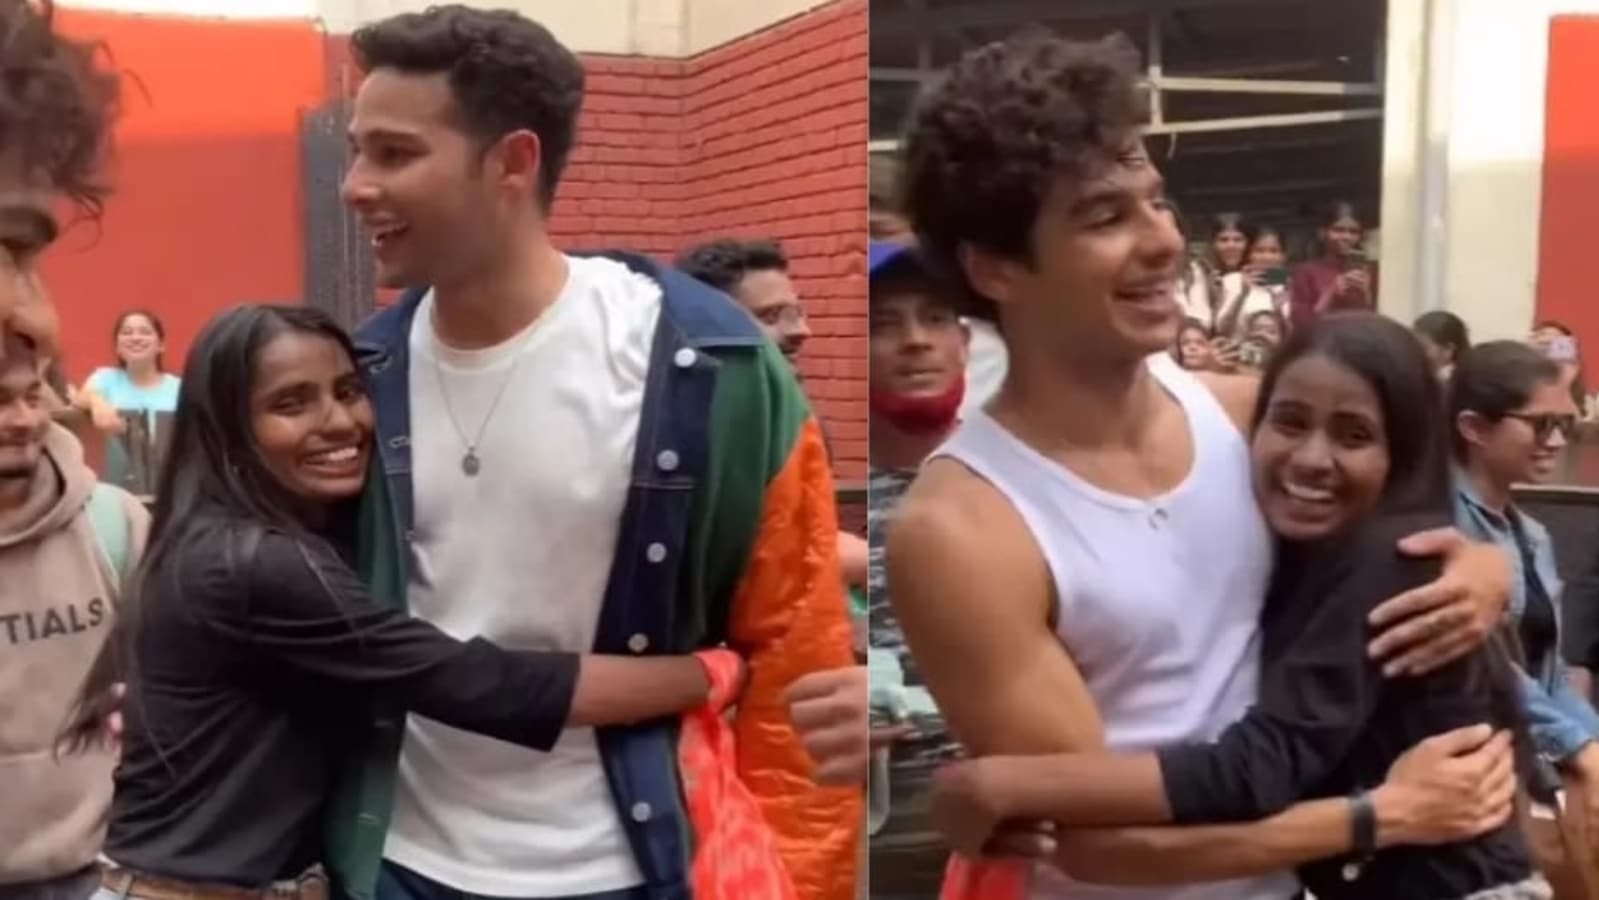 ishaan-khatter-siddhant-chaturvedi-try-to-calm-down-screaming-fan-at-phone-bhoot-event-reddit-finds-video-creepy